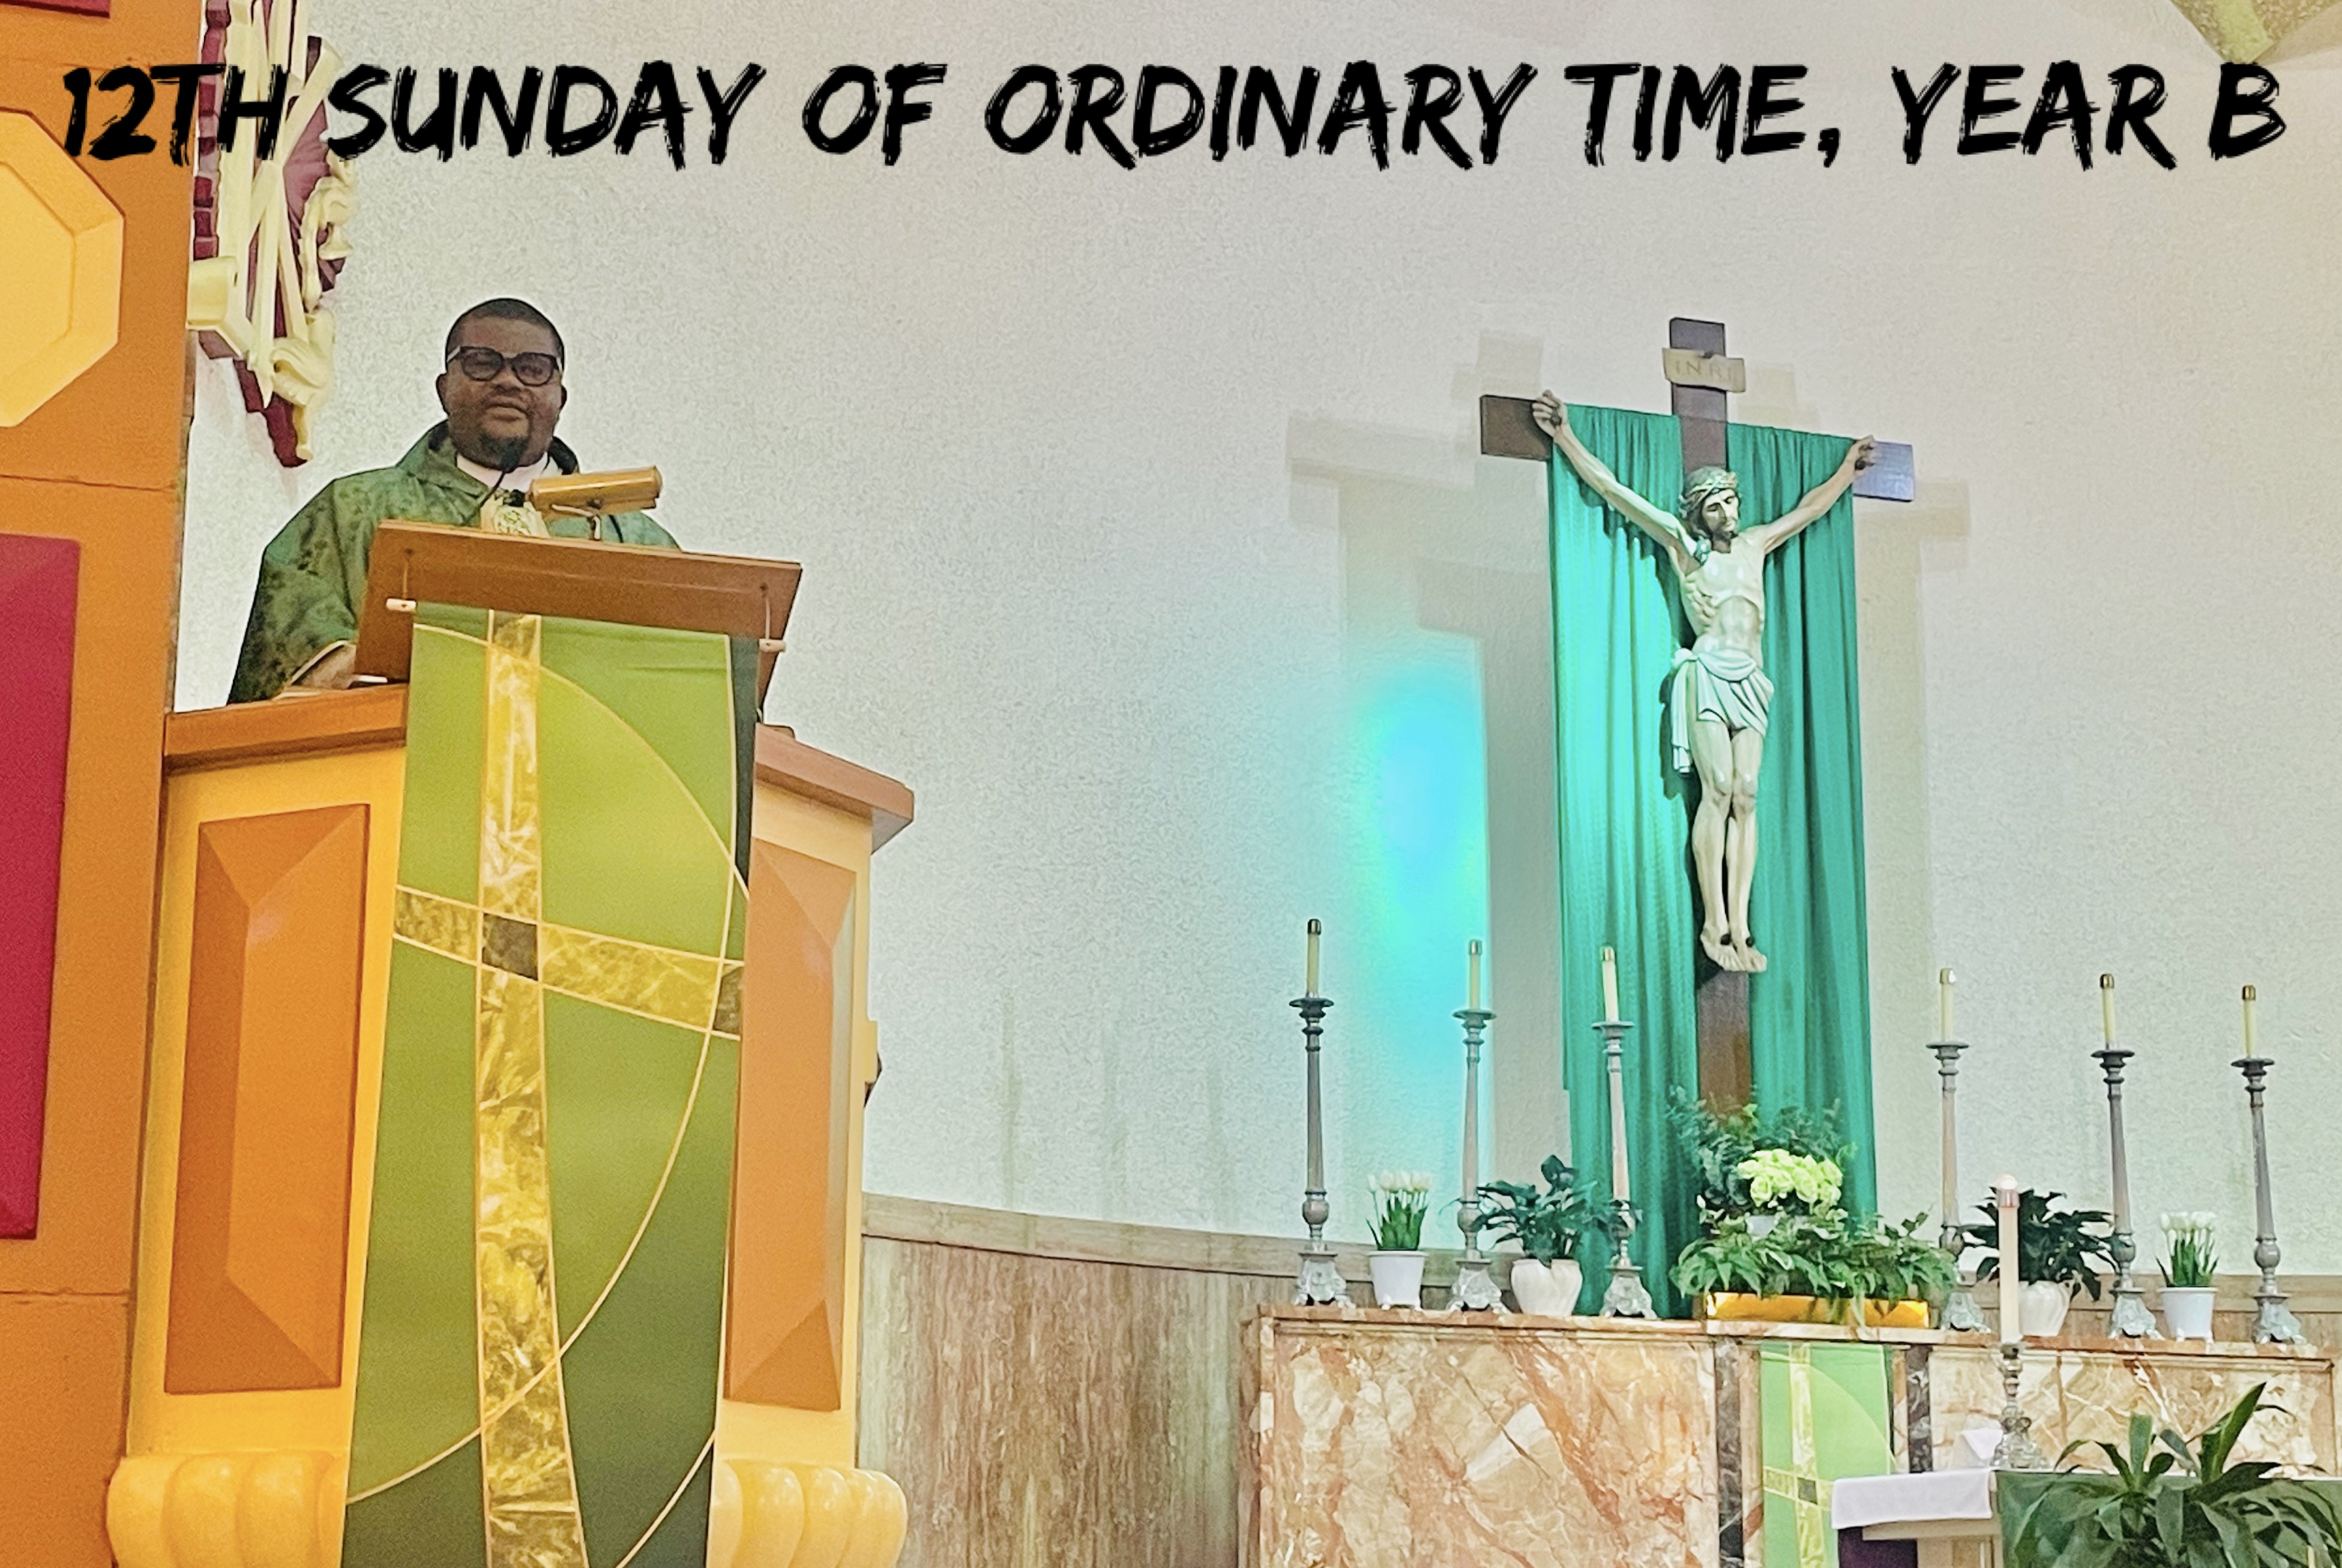 12th Sunday of Ordinary Time, Year B